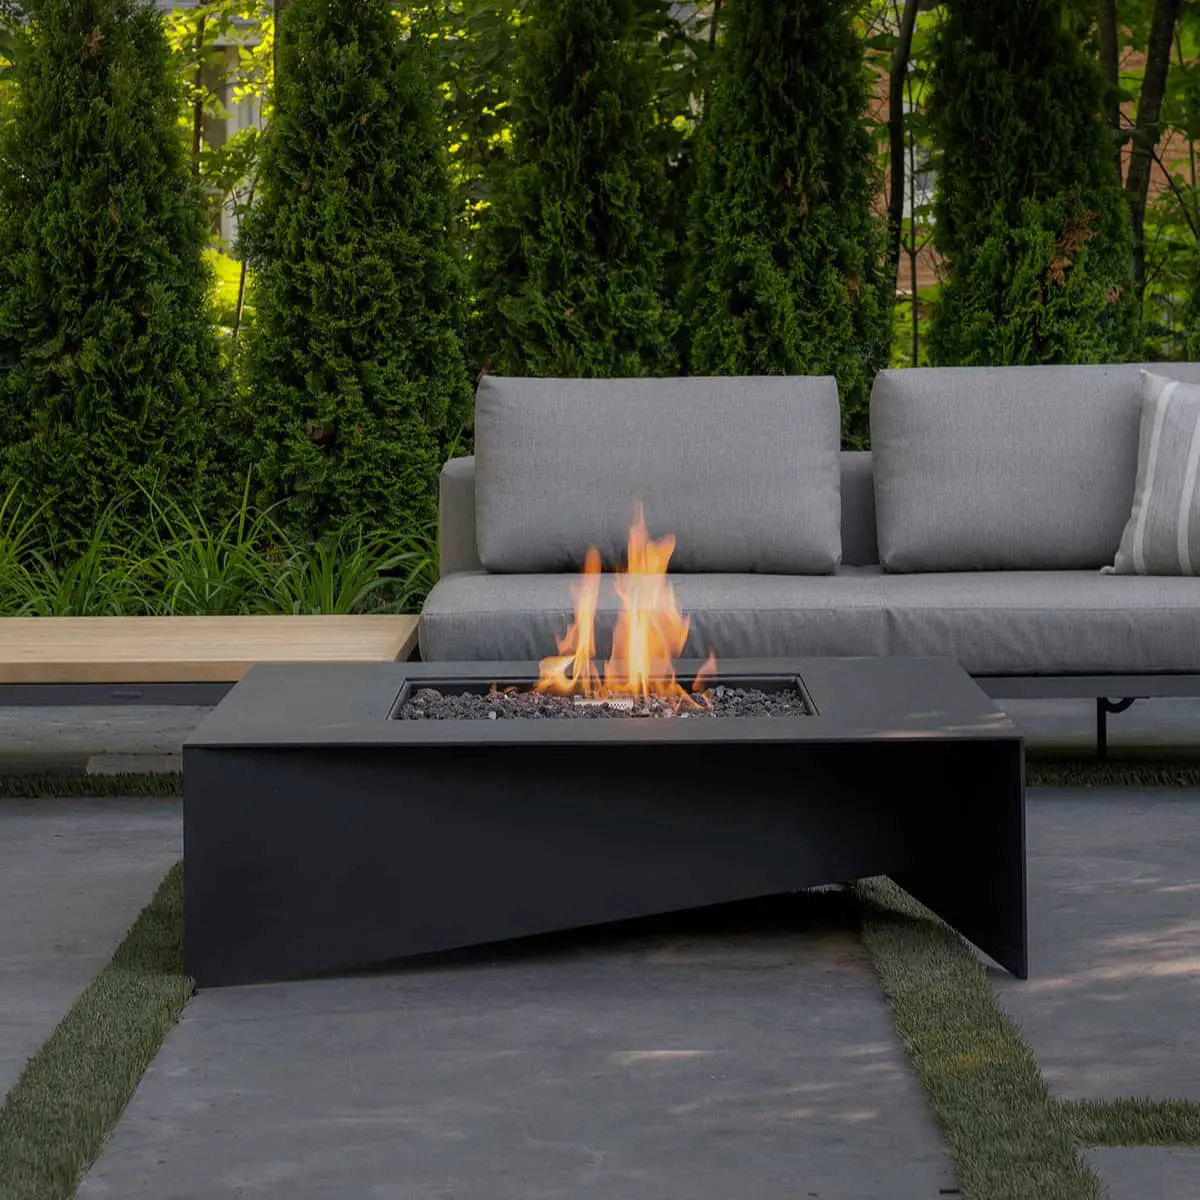 Ultimate Fire Pit Outdoor Fireplace, Is A Propane Fire Pit Considered Open Burning